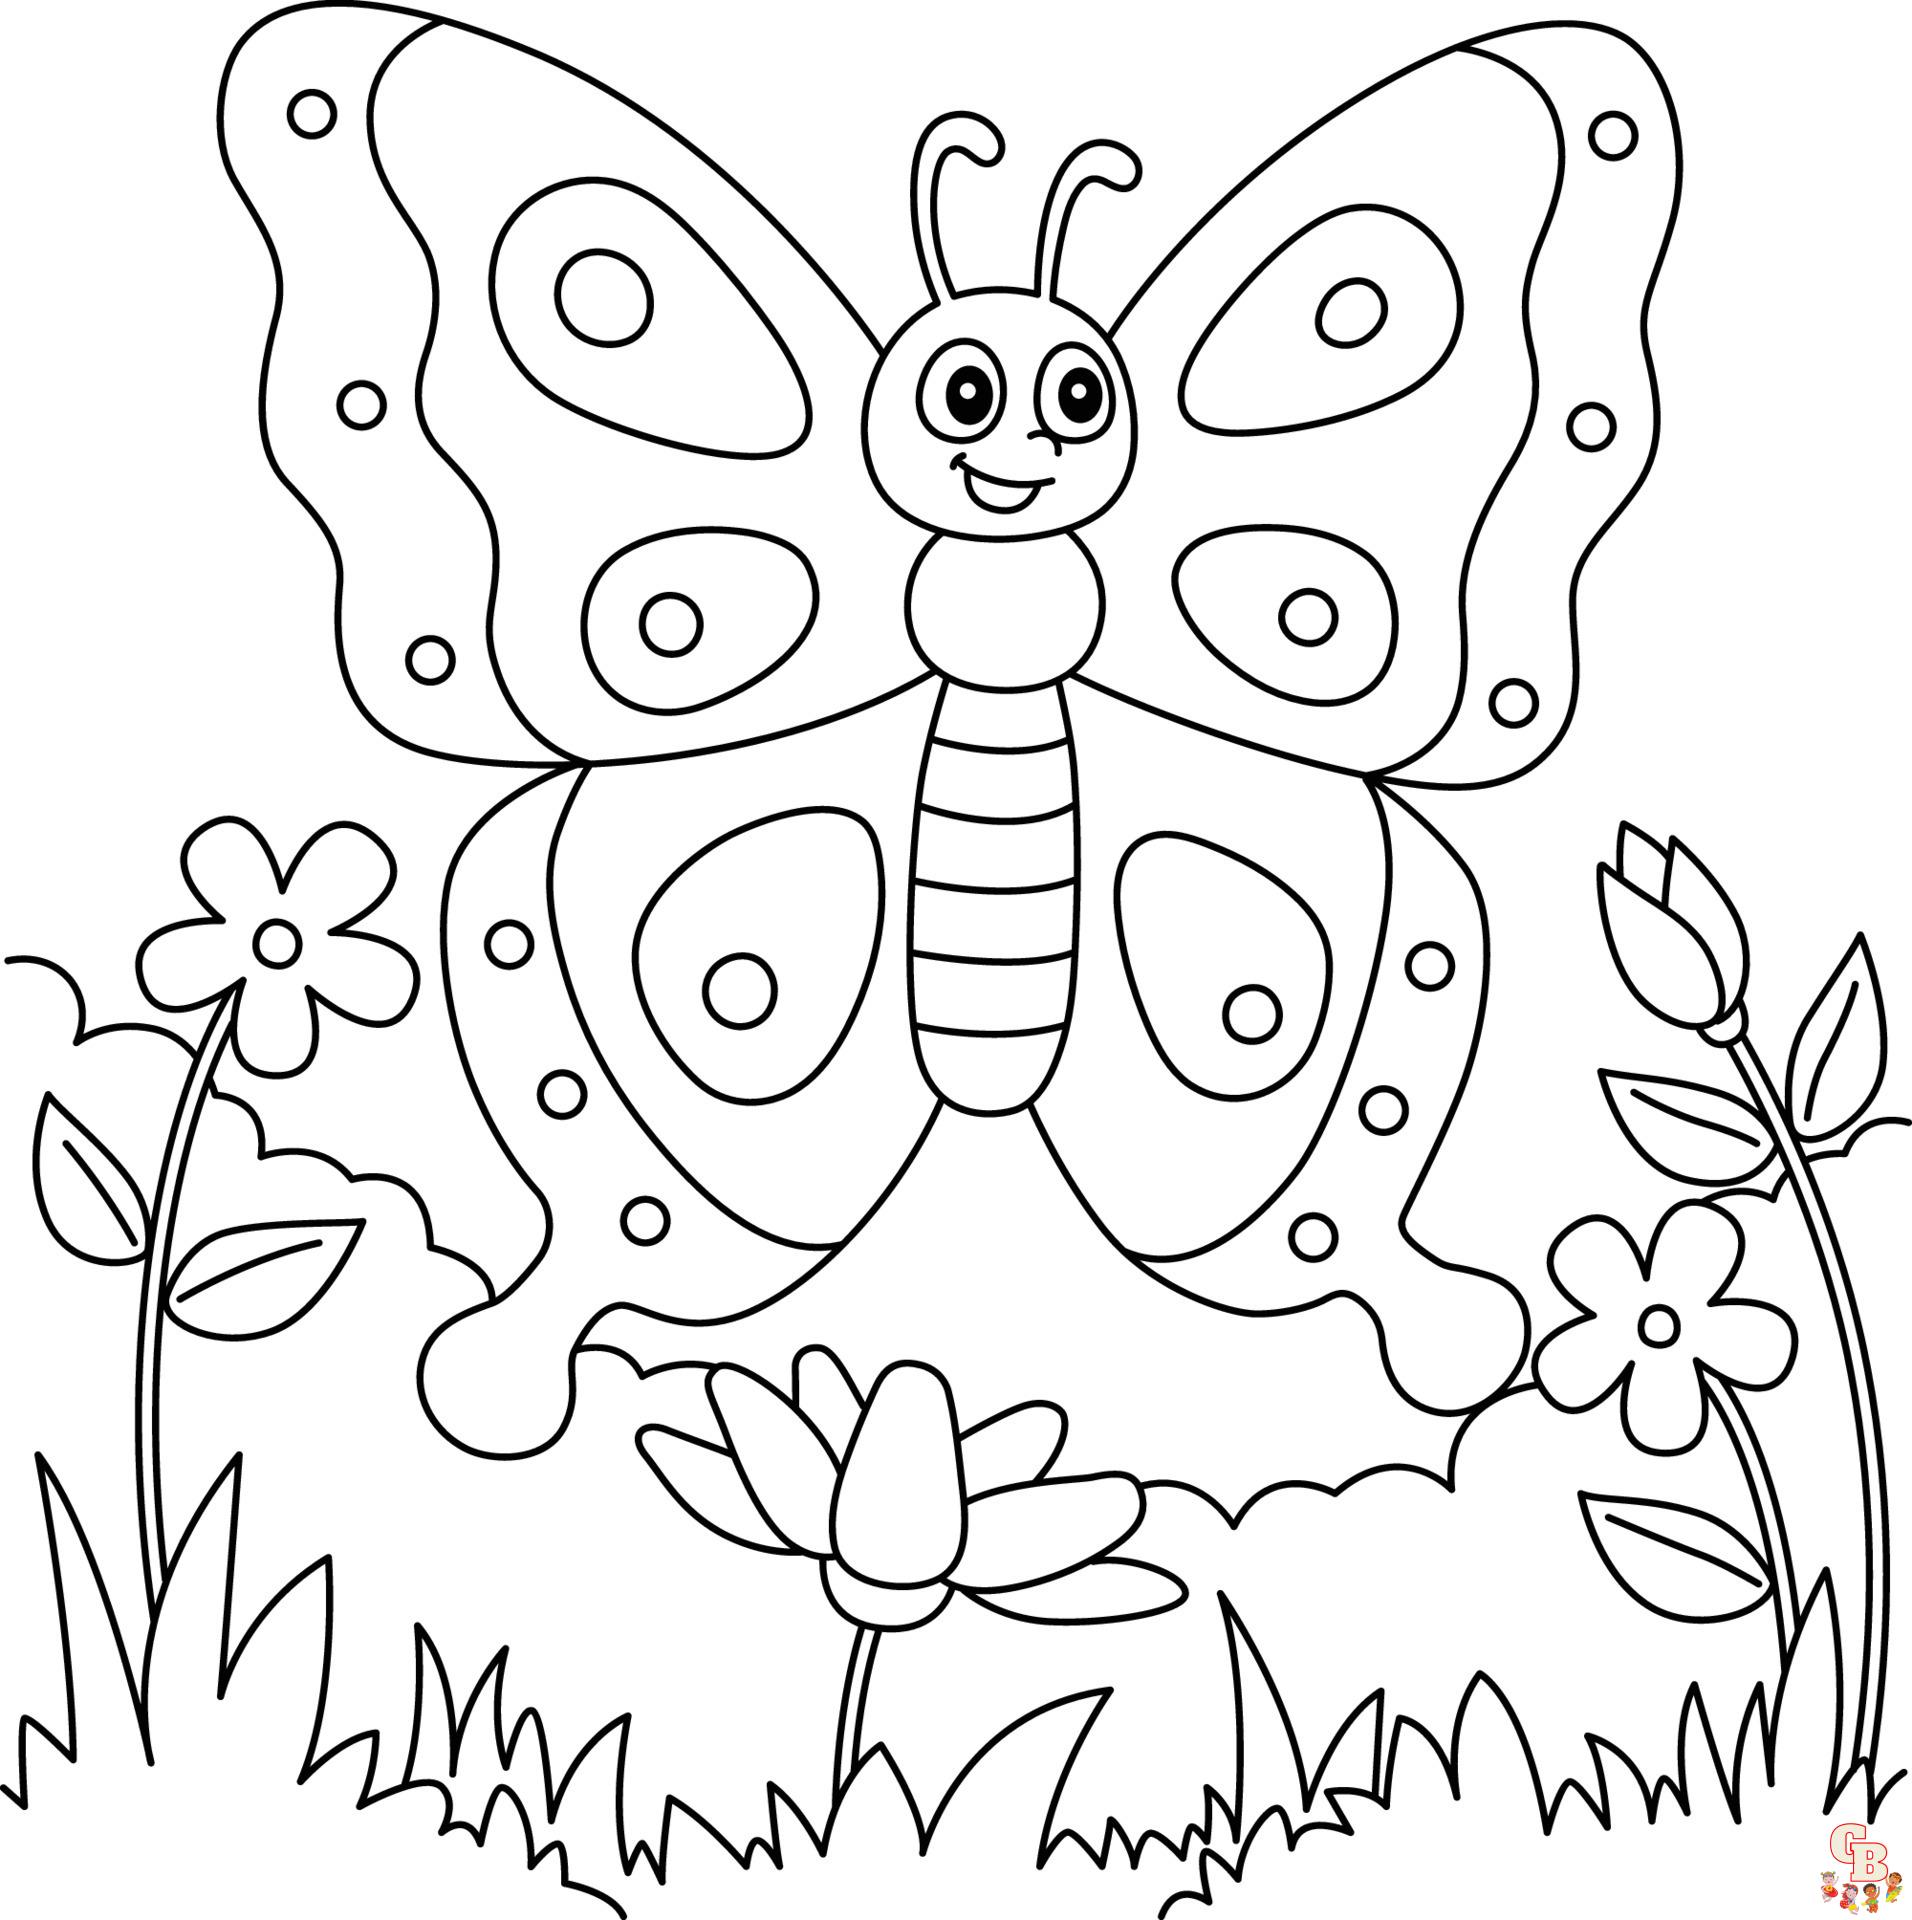 Flutter into fun with preschool butterfly coloring pages